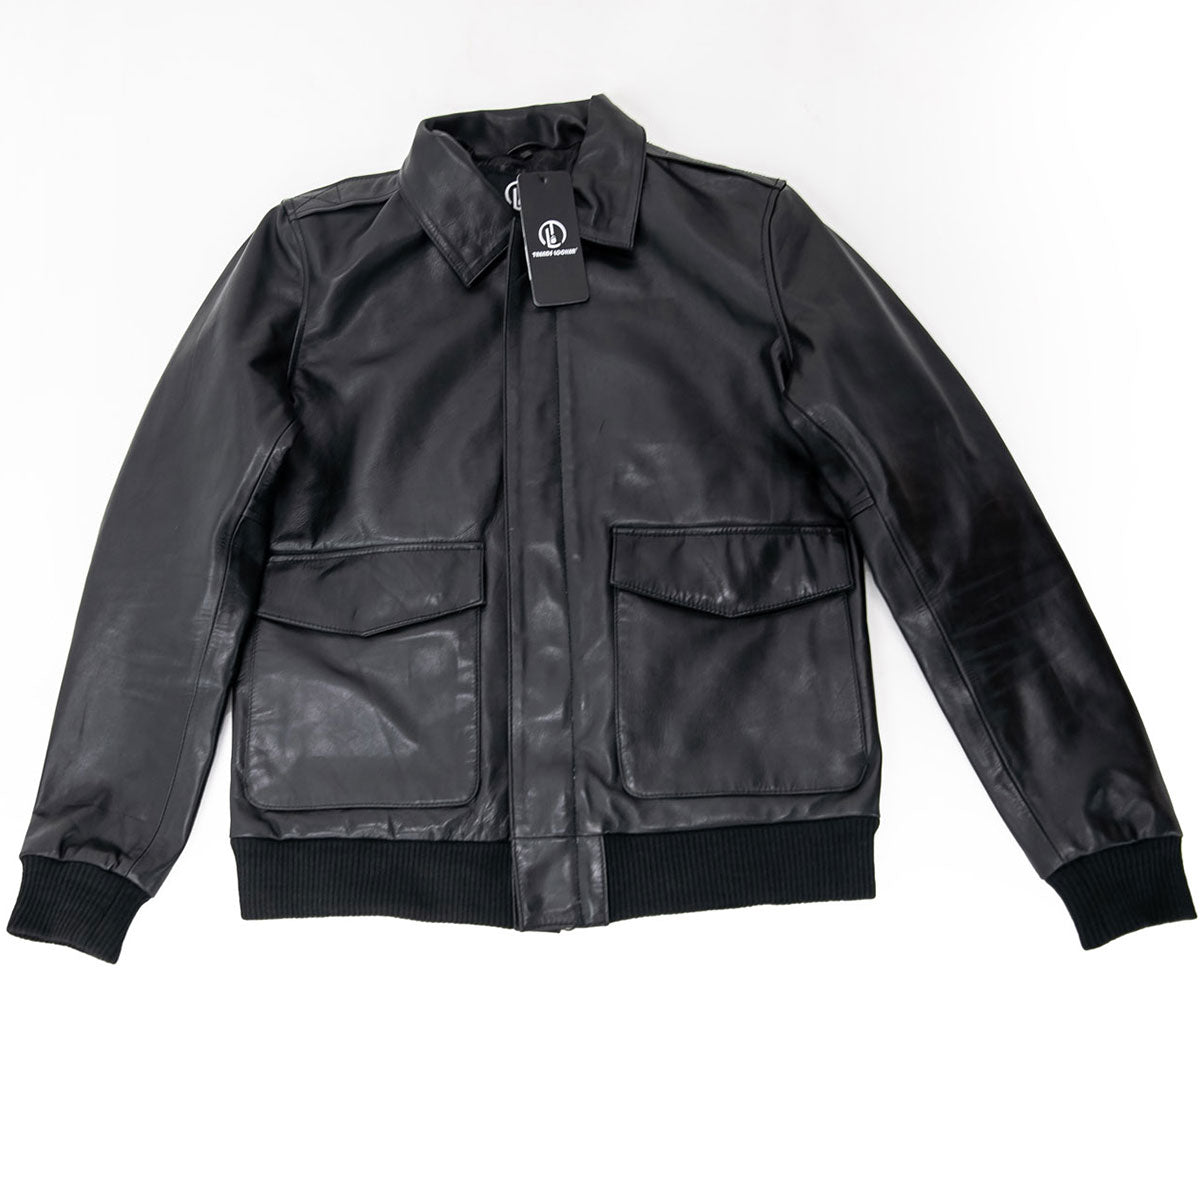 A2 Bomber Leather AIR Force Jacket Aviator Style